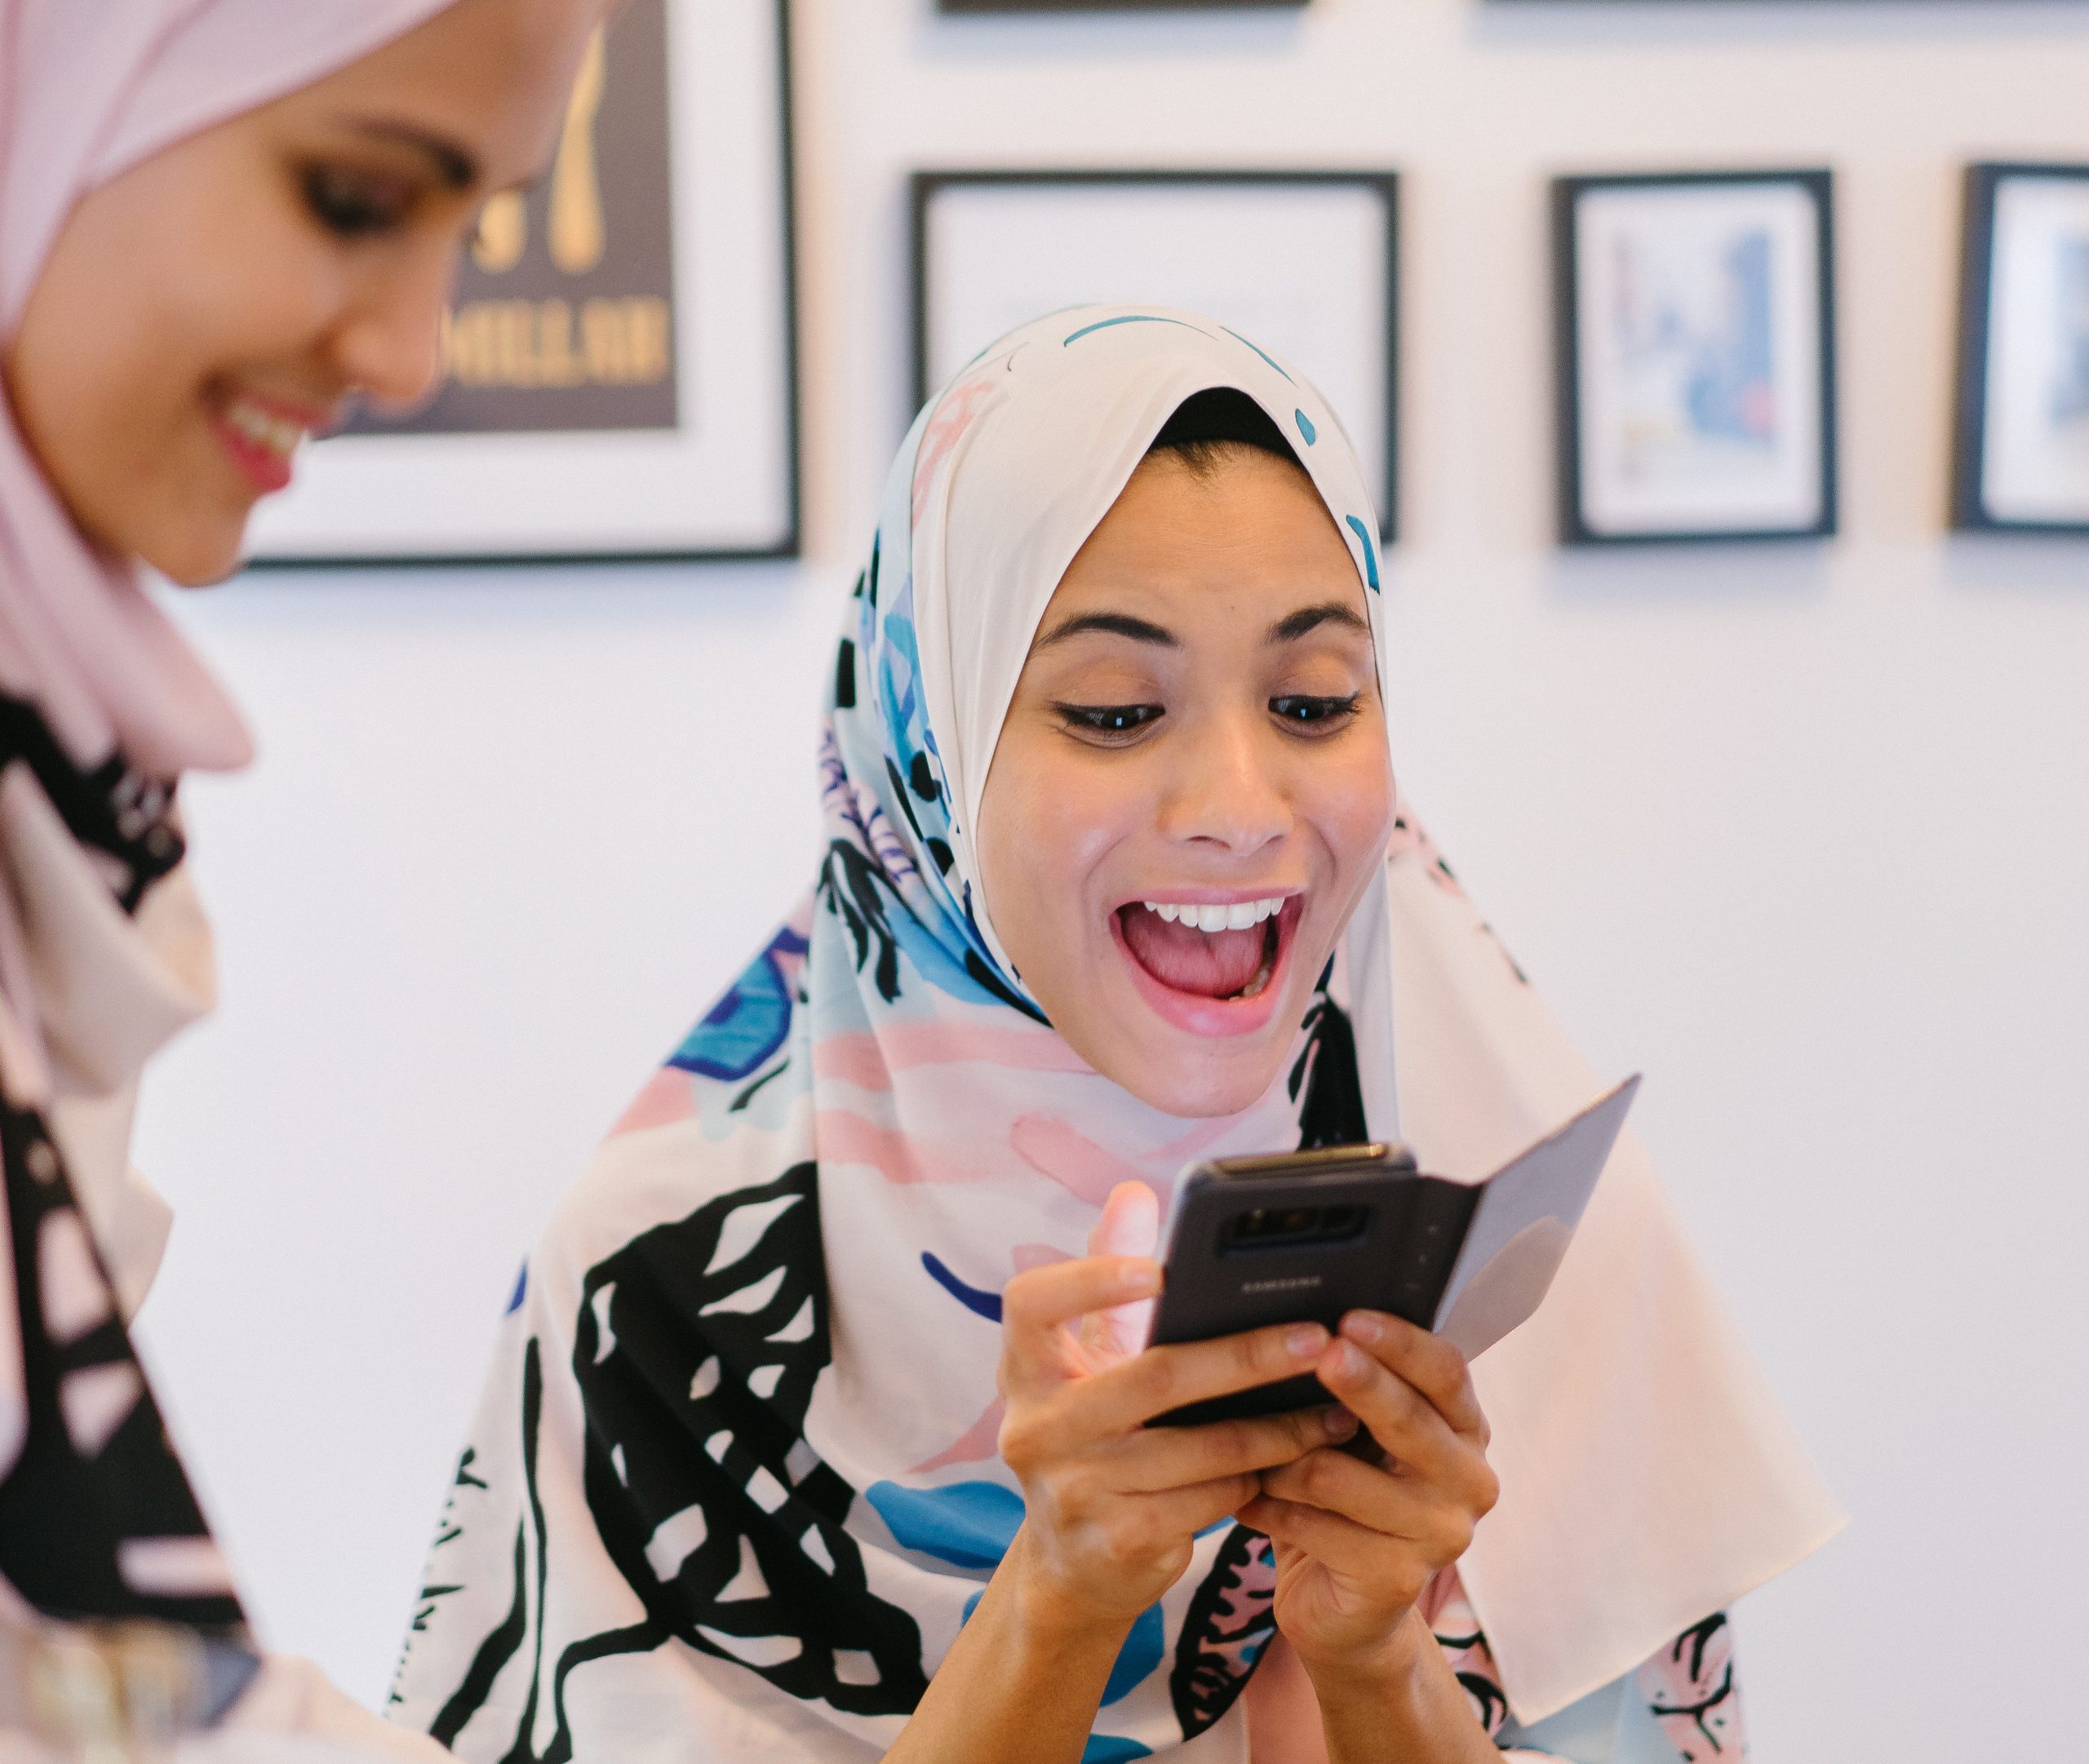 10 Halal-focused startups to watch in 2020